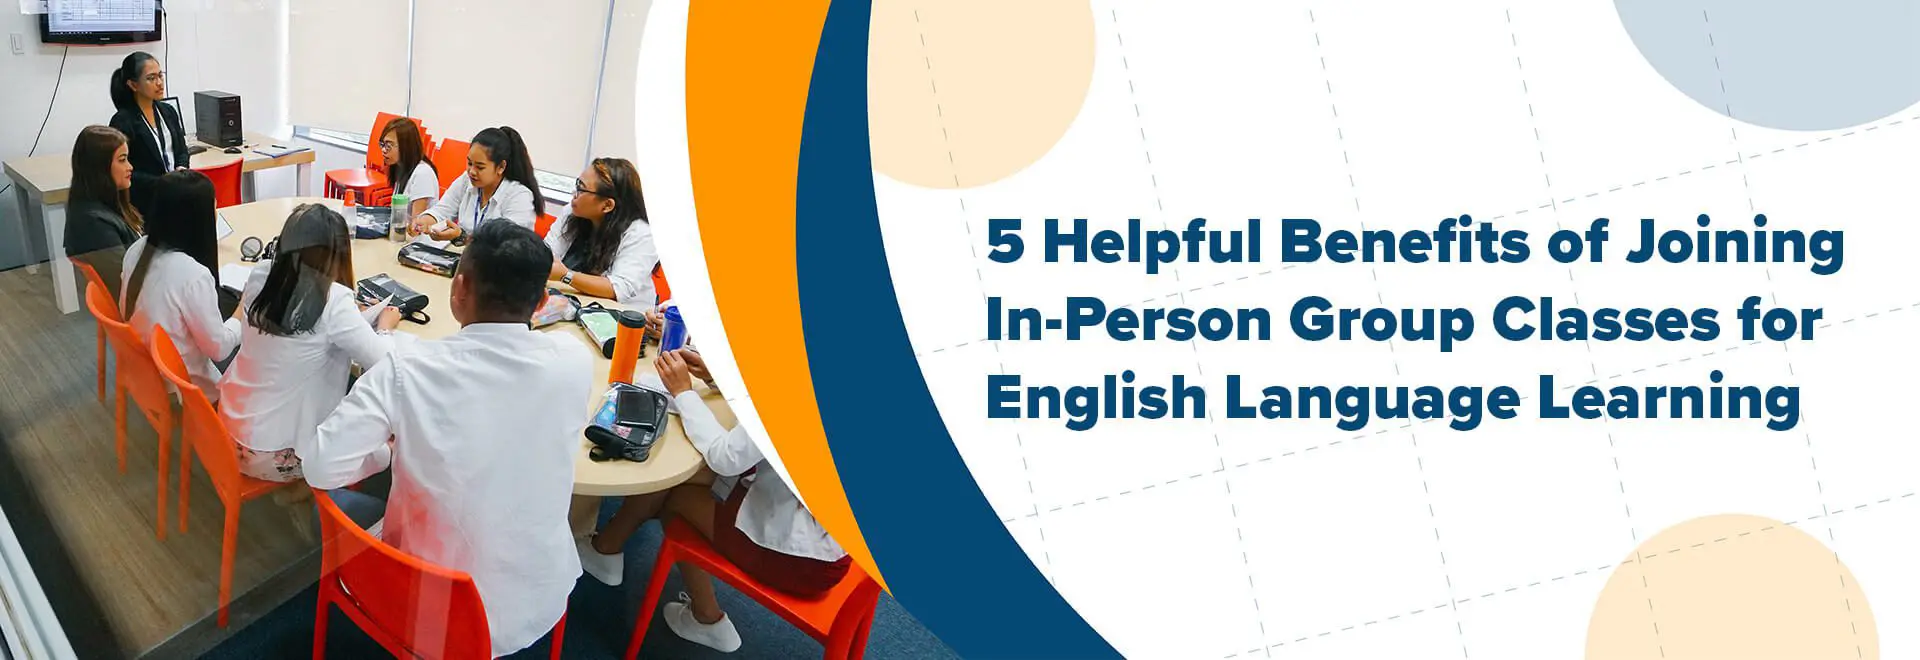 5 Helpful Benefits of Joining In-Person Group Classes for English Language Learning